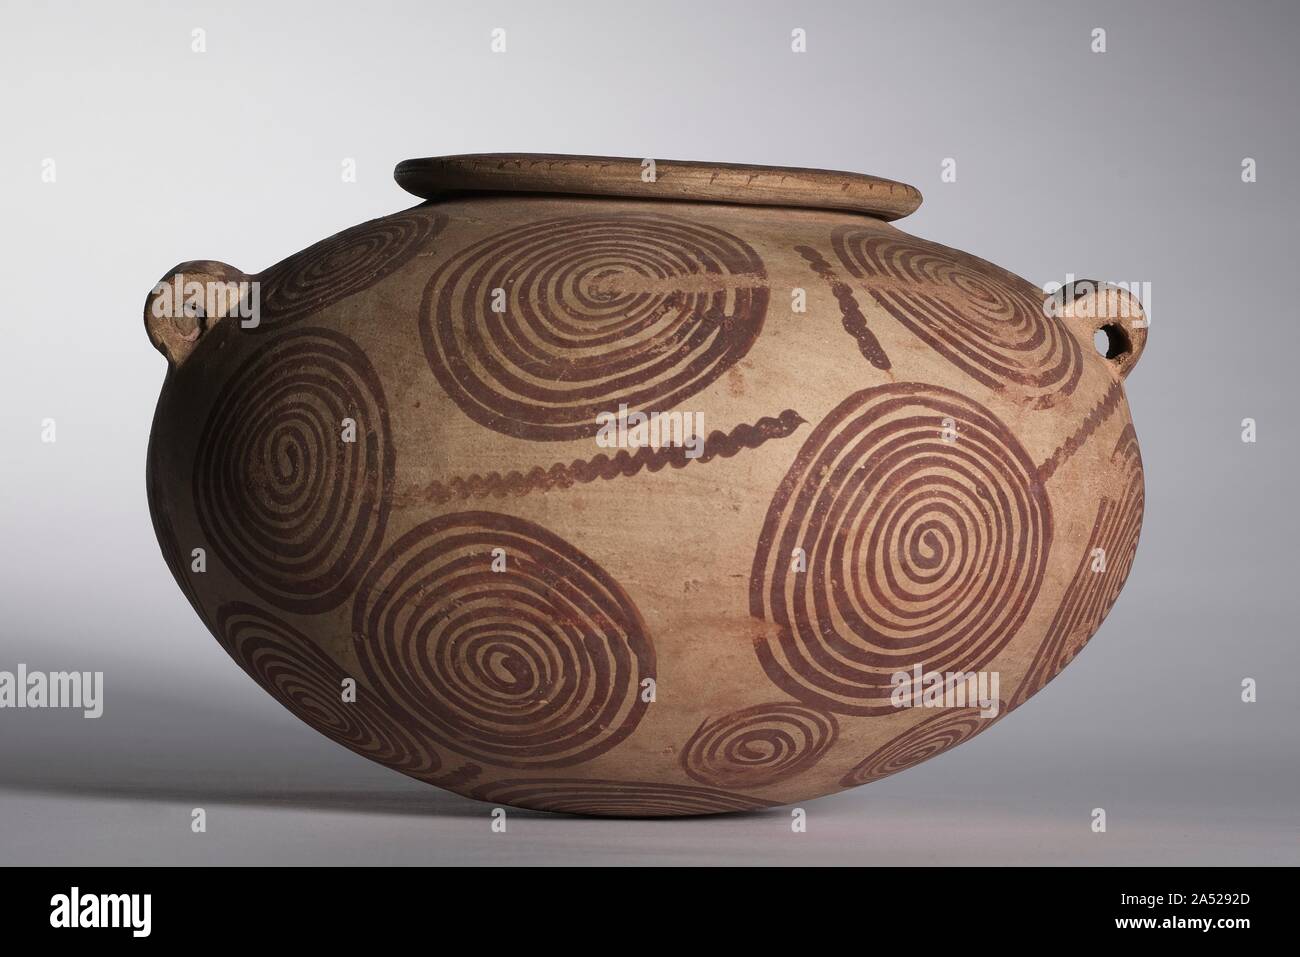 Squat Jar with Lug Handles, c. 3400-3300 BC. Buff-coloured pottery decorated in red paint is characteristic of the later Predynastic period. The spirals and wavy lines on this jar imitate the appearance of more costly vessels made of hard stones. Stock Photo